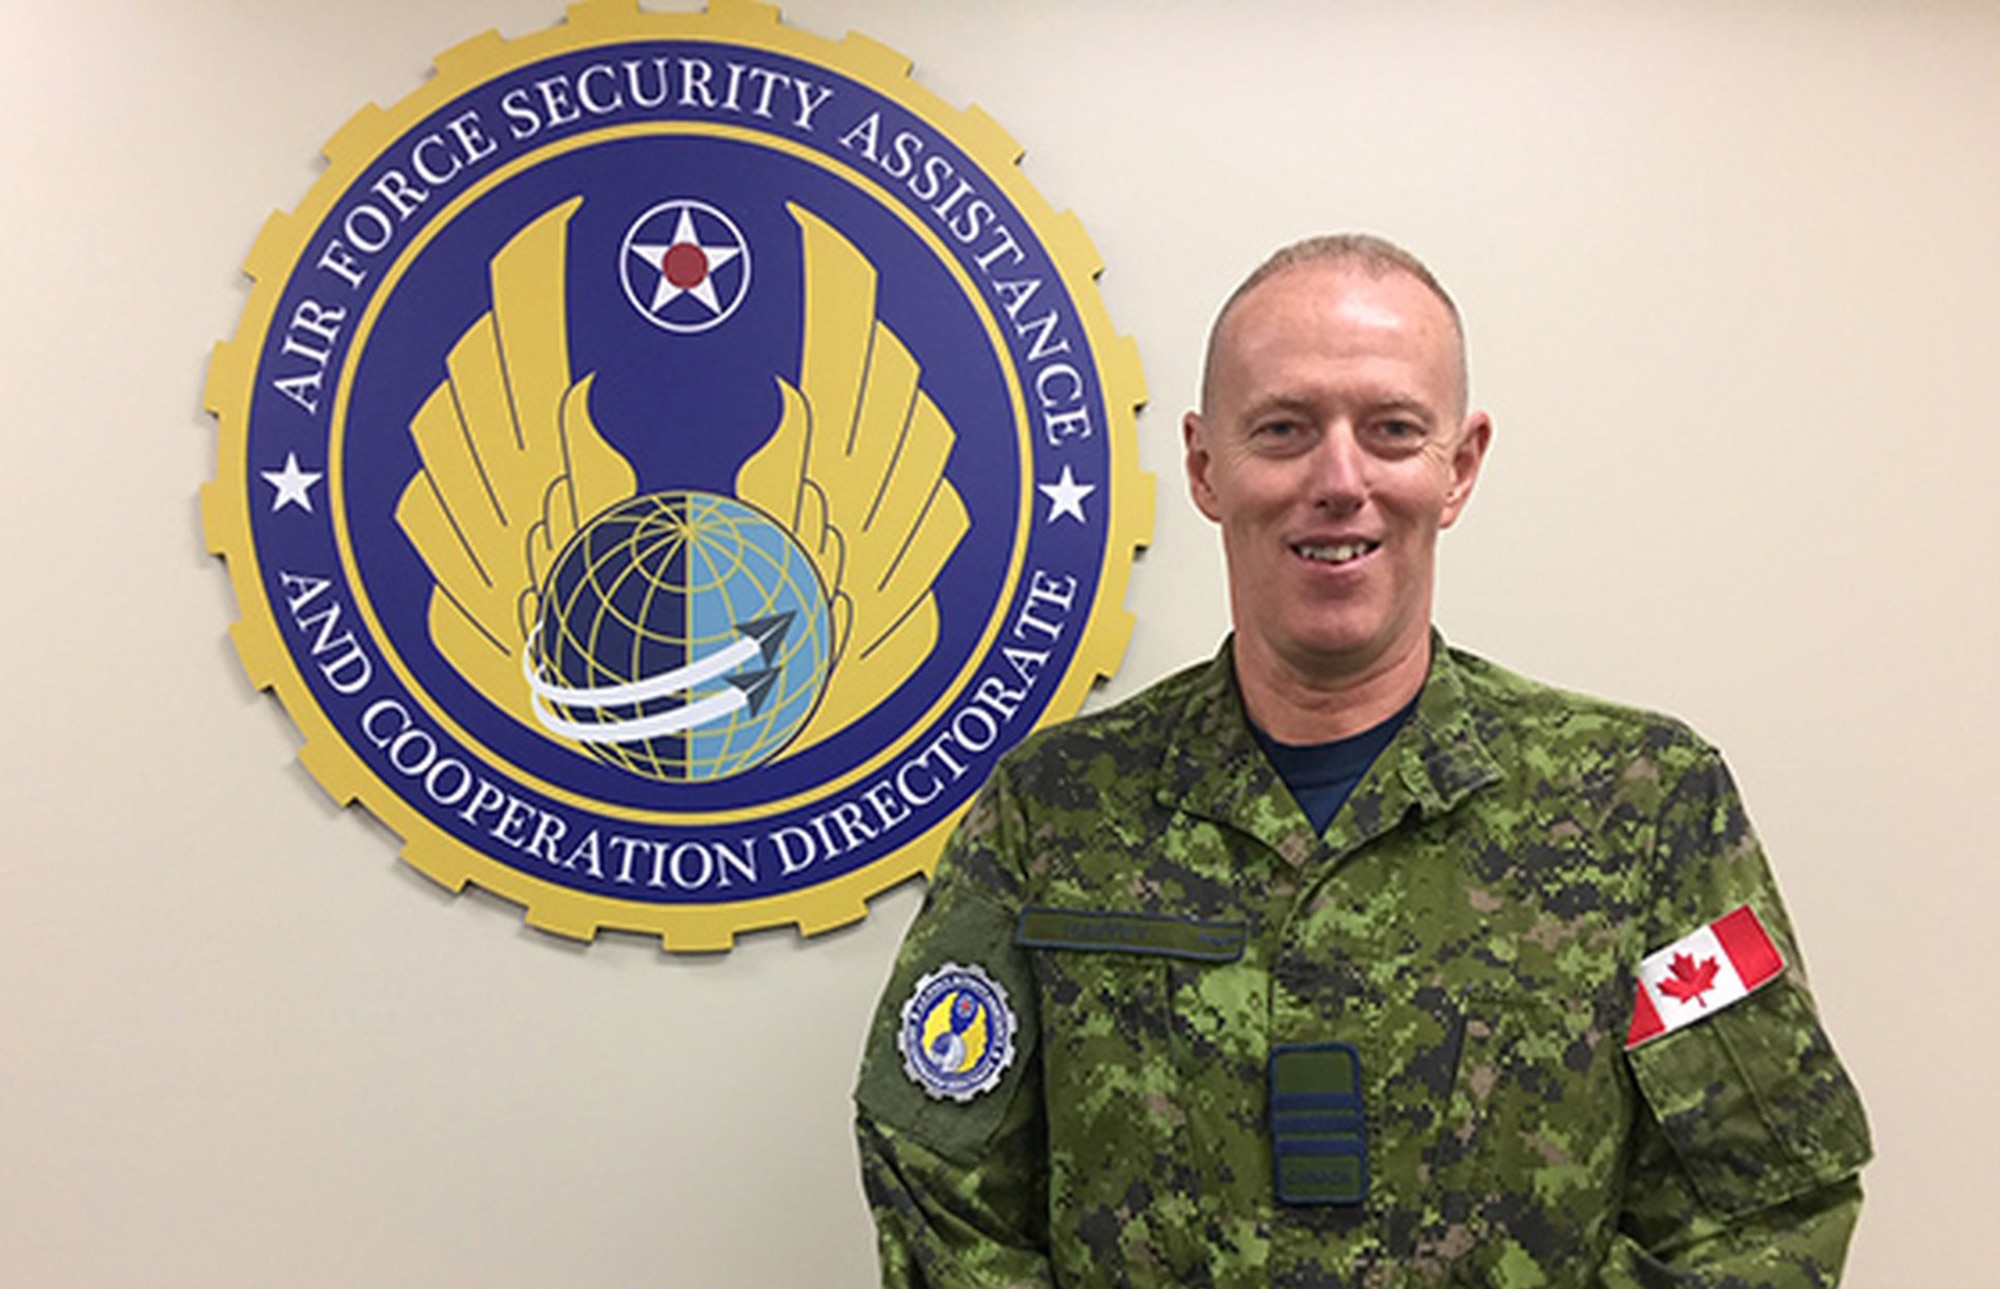 Lt. Col. Jean-Francois Harvey of Canada serves as lead representative of the foreign liaison officers, part of the Air Force Life Cycle Management Center’s Air Force Security Assistance and Cooperation Directorate, headquartered at Wright-Patterson Air Force Base. (Skywrighter photo/Amy Rollins)